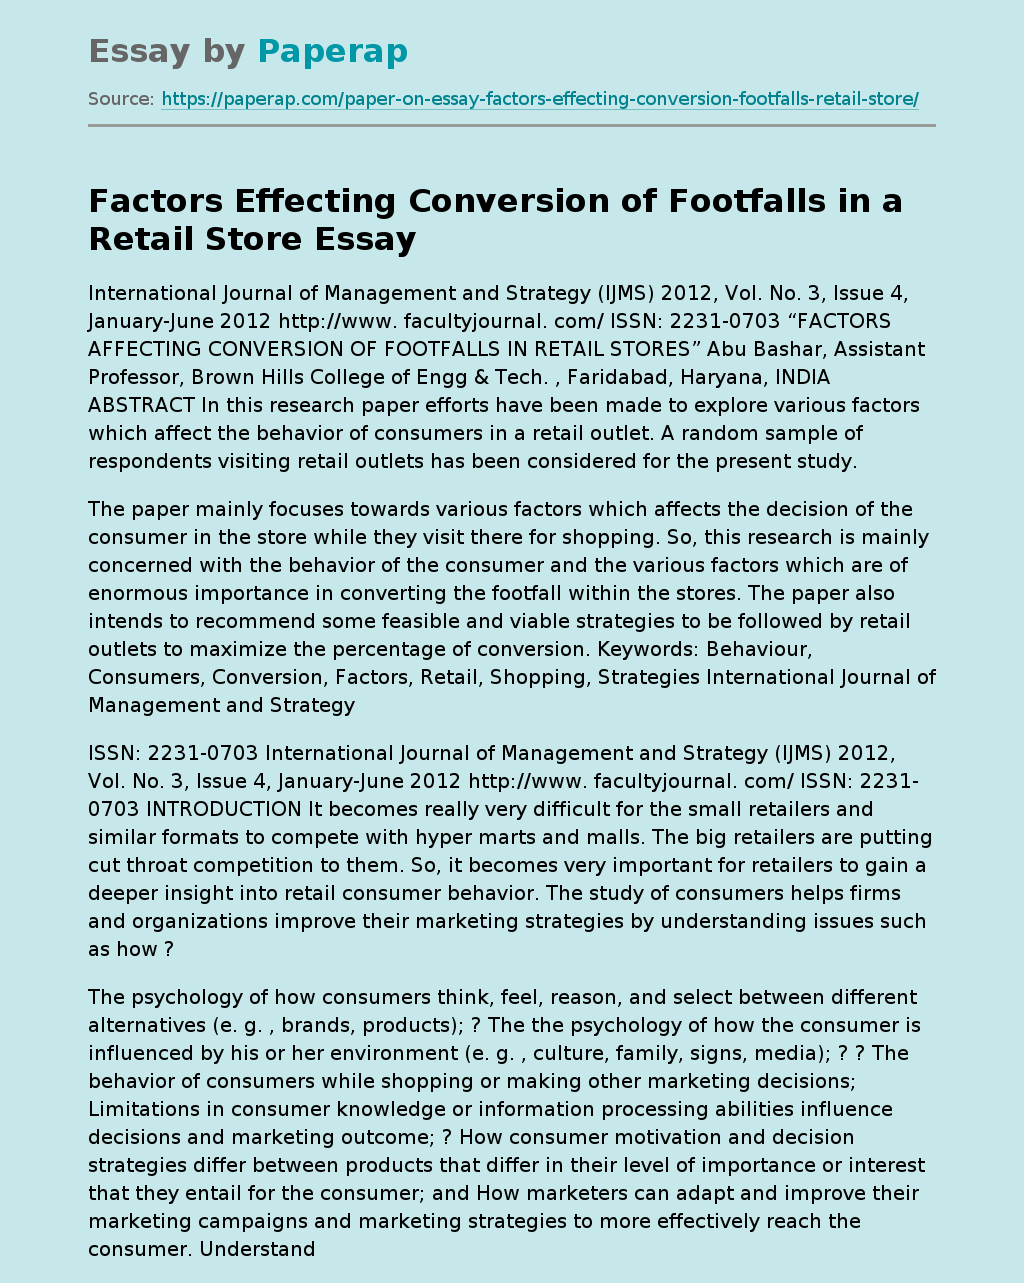 Factors Effecting Conversion of Footfalls in a Retail Store